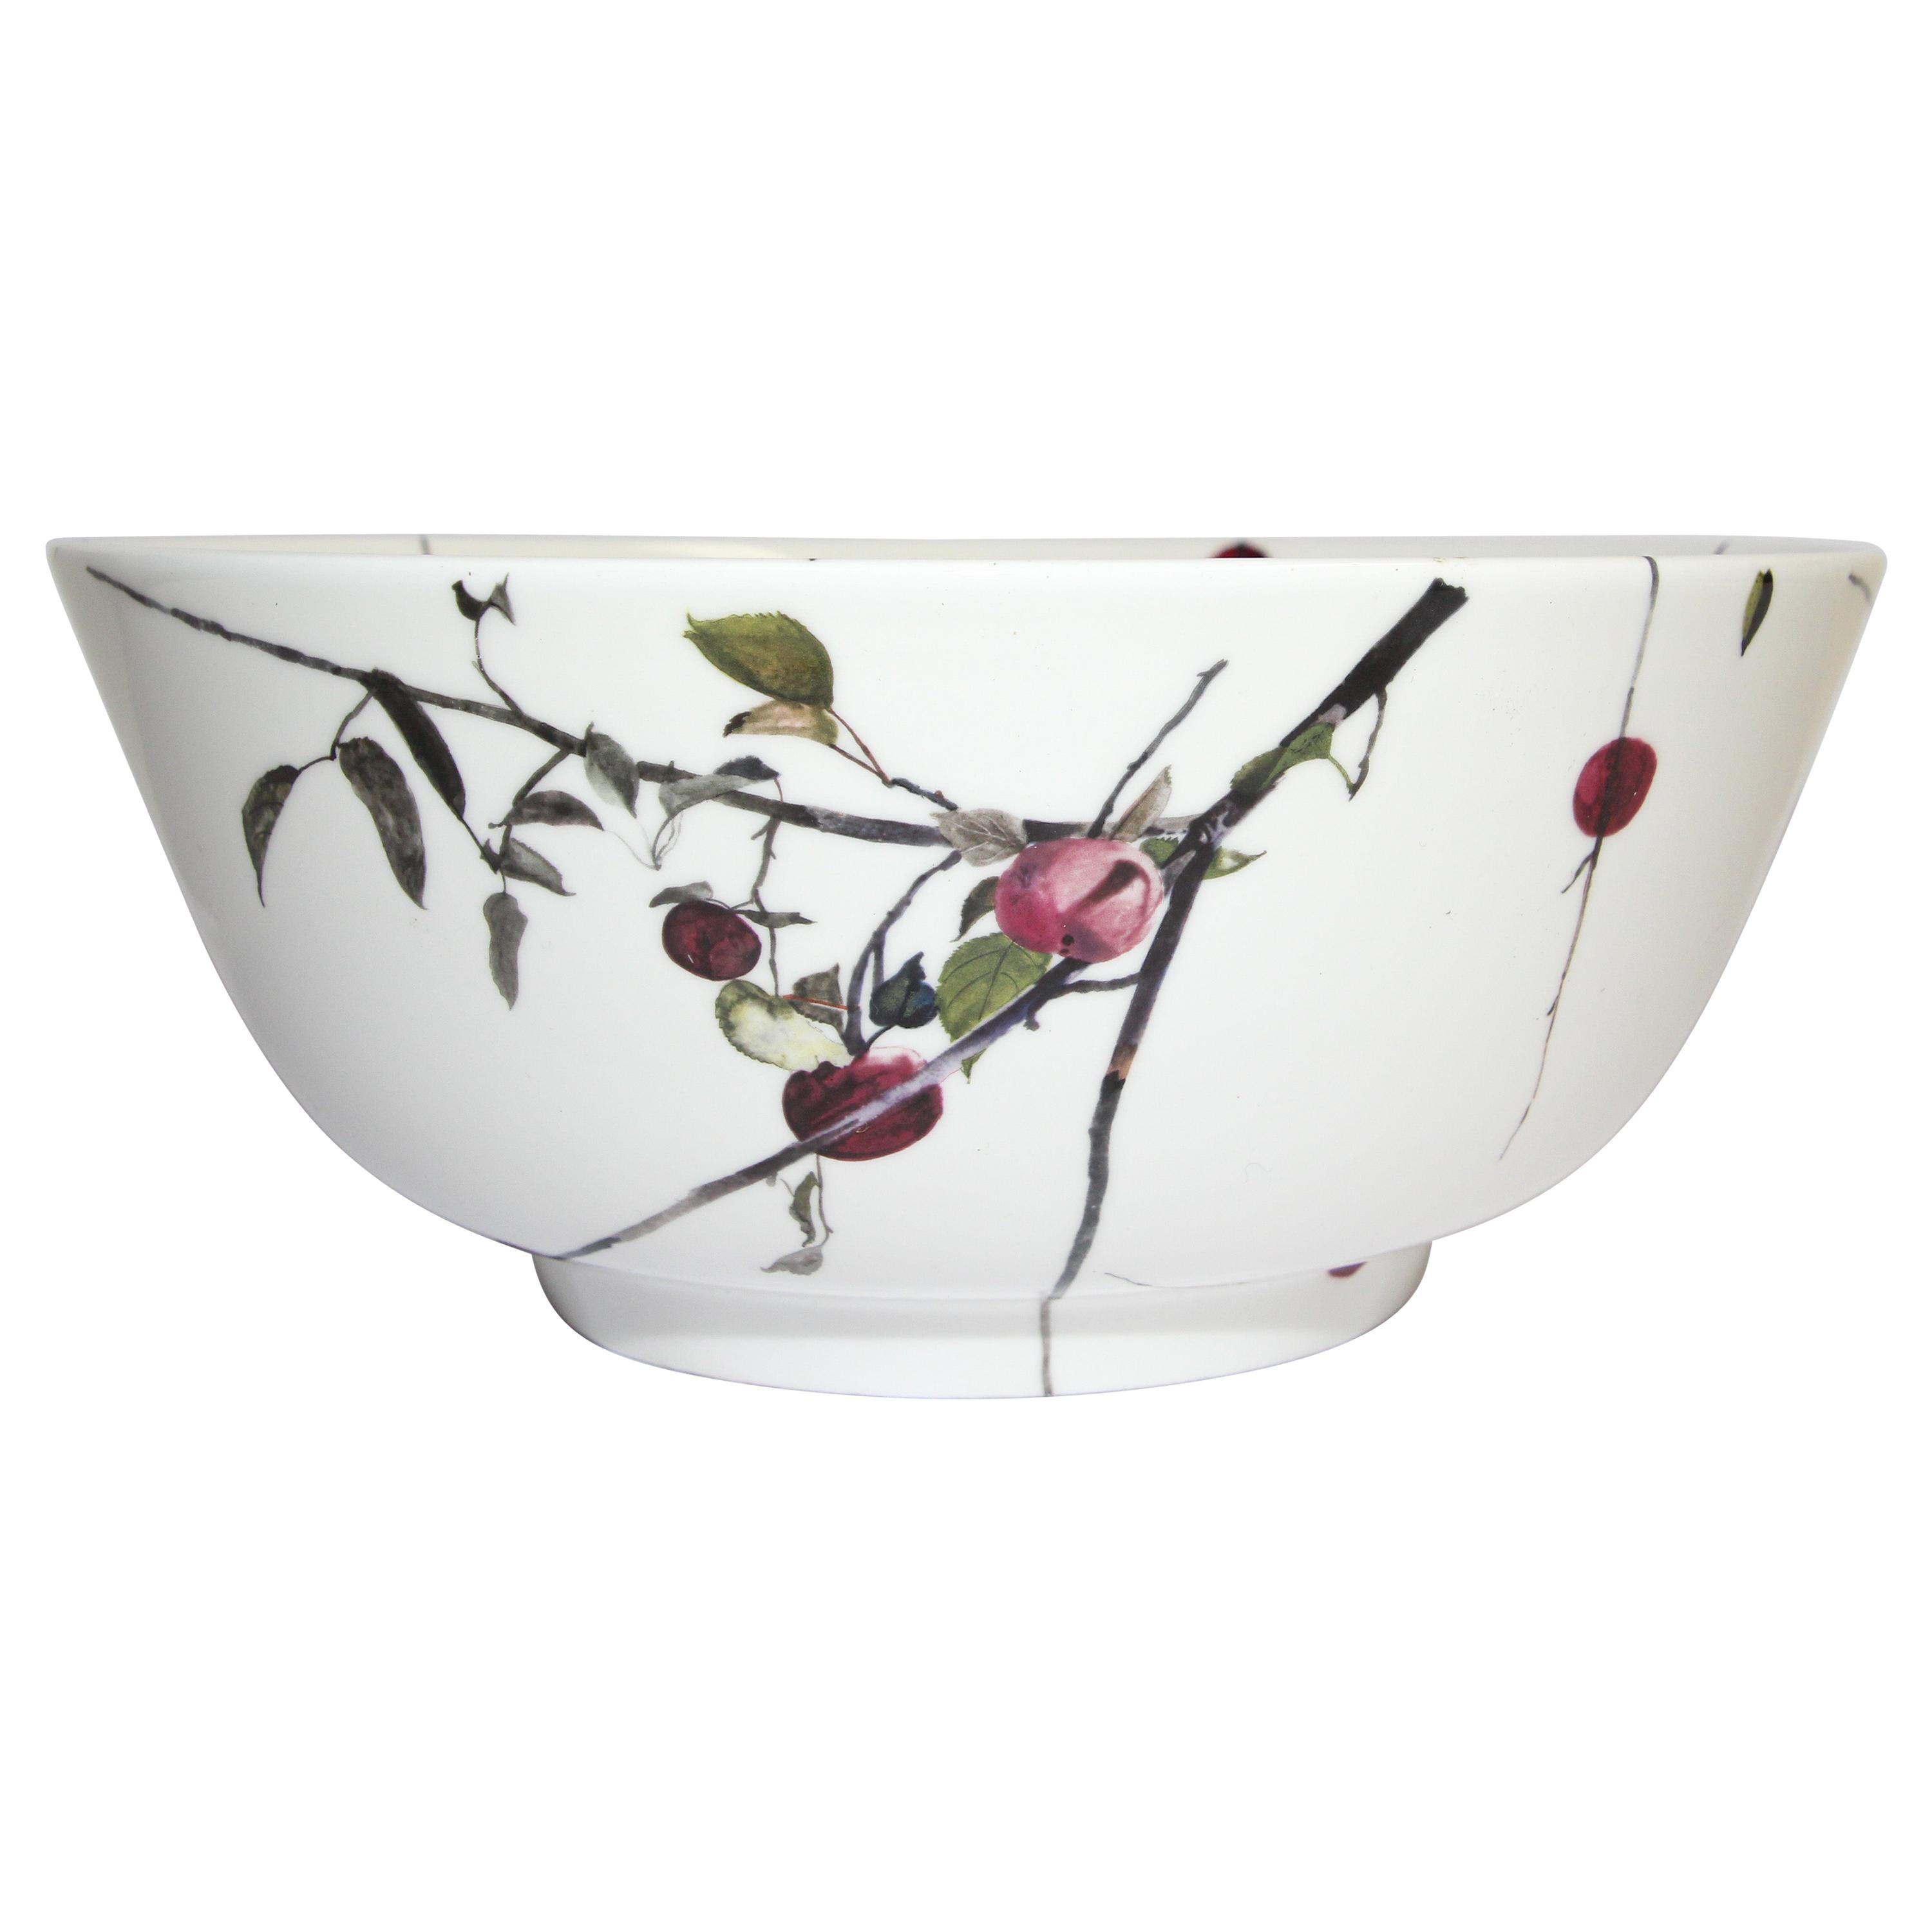 Royal Doulton Porcelain Bowl Designed by Andrew Wyeth England 1973 For Sale